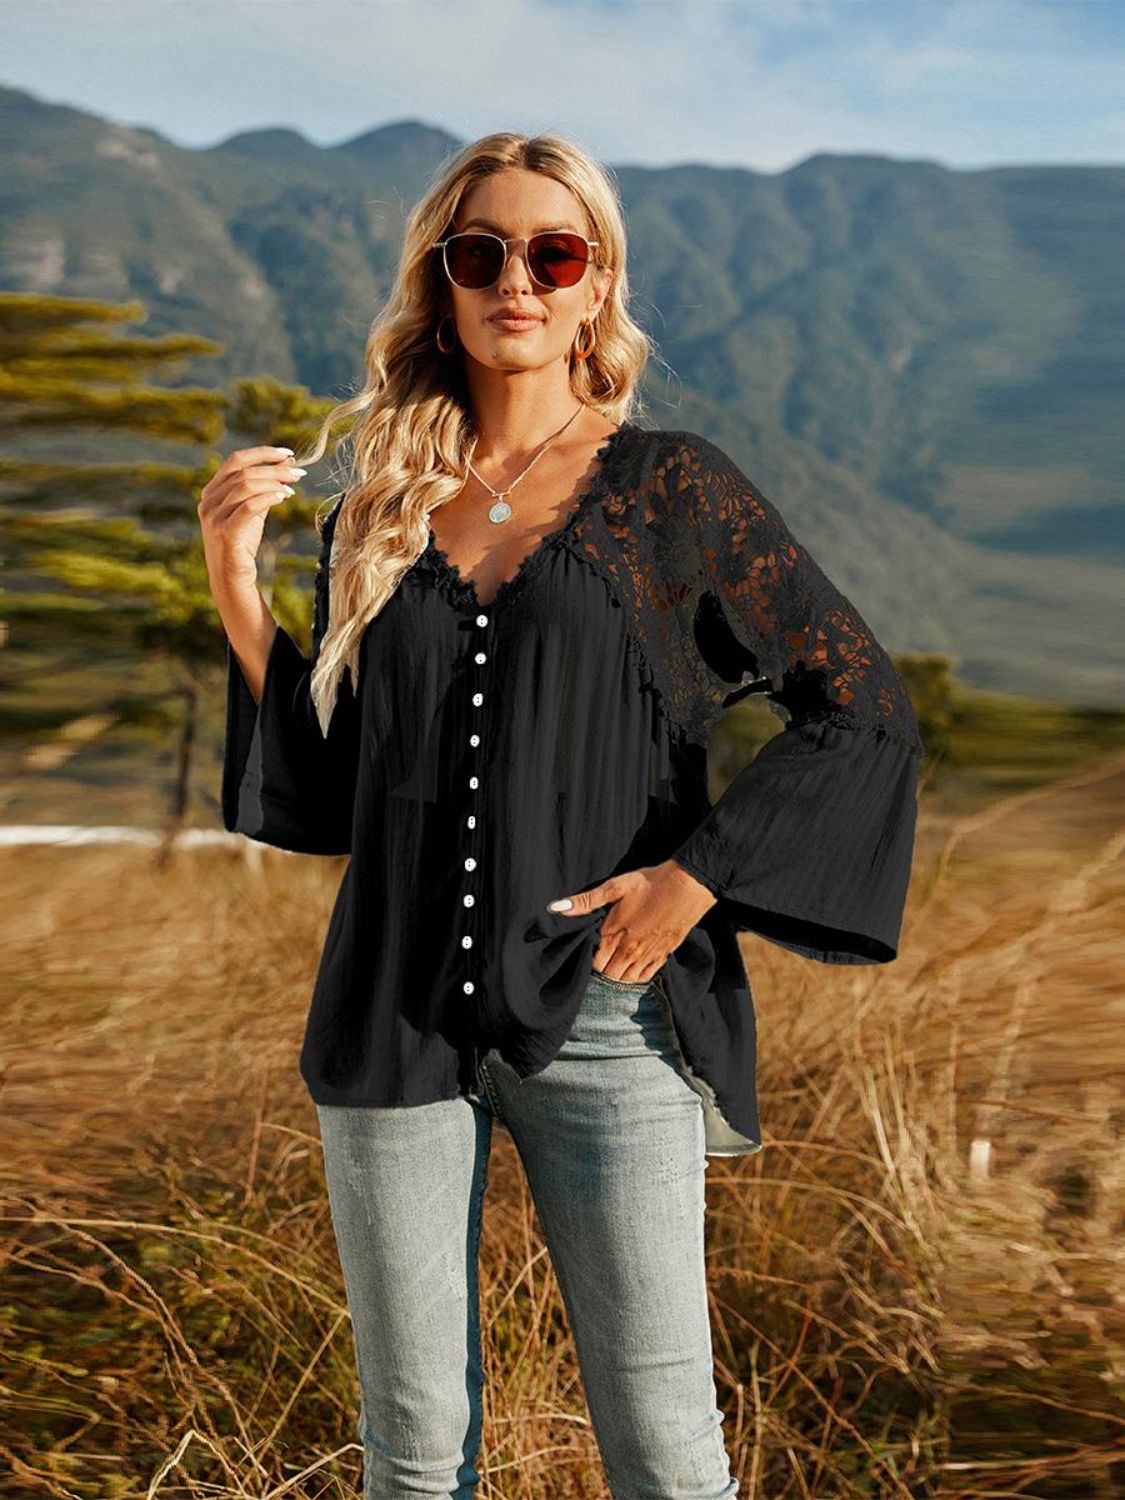 Spliced Lace Buttoned Blouse - Dash Trend